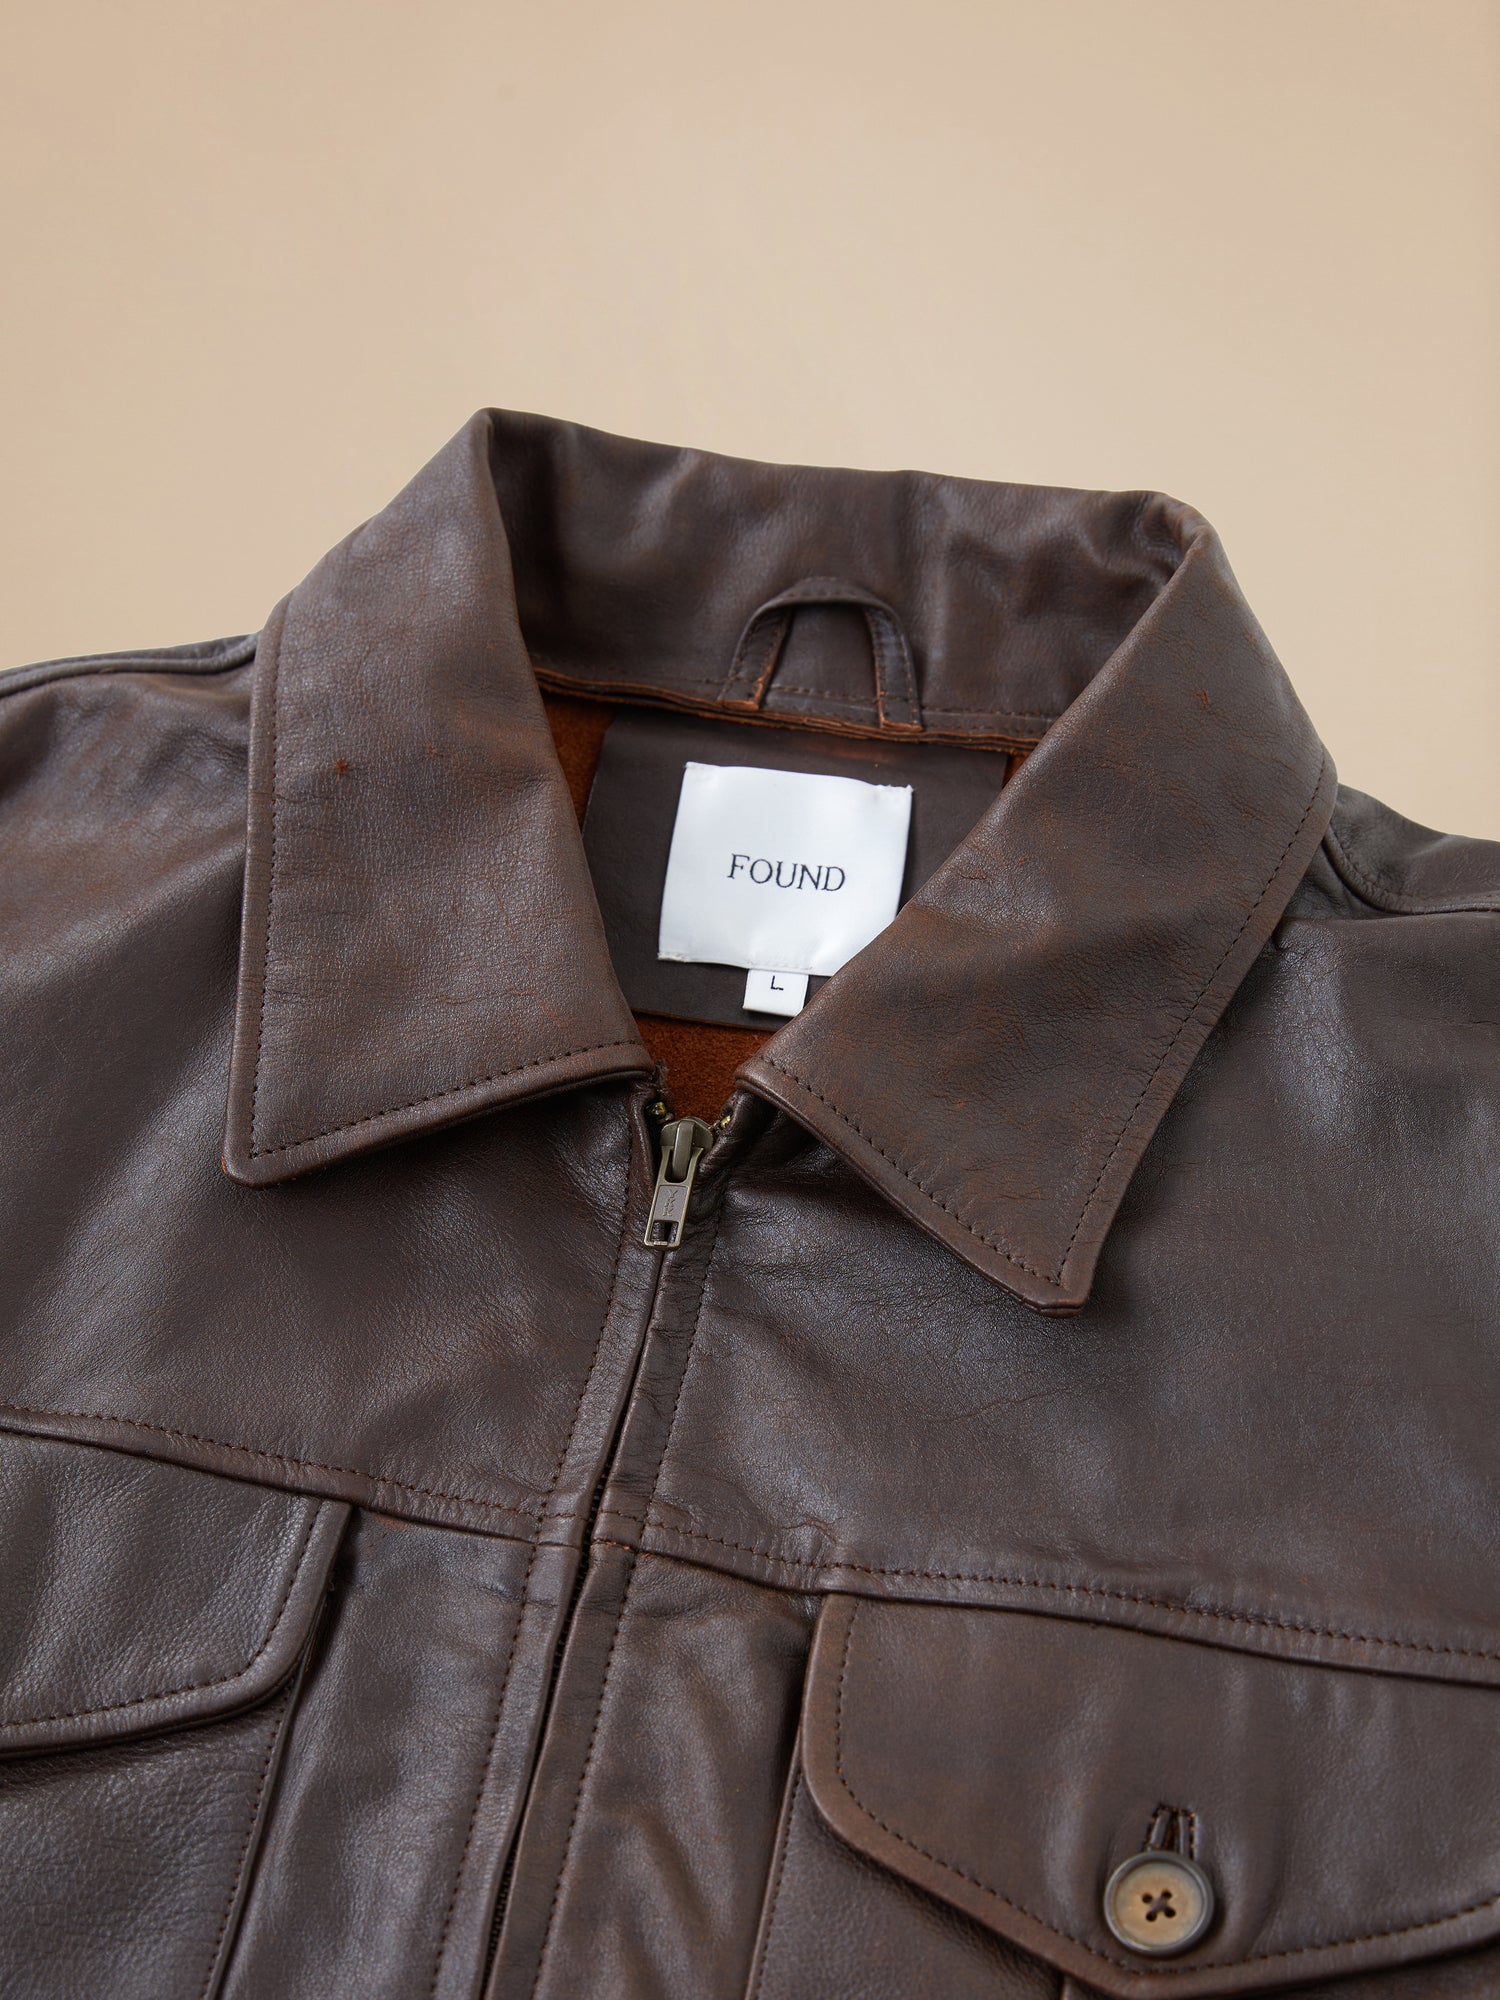 A close up of a Found Sepia Leather Overshirt.